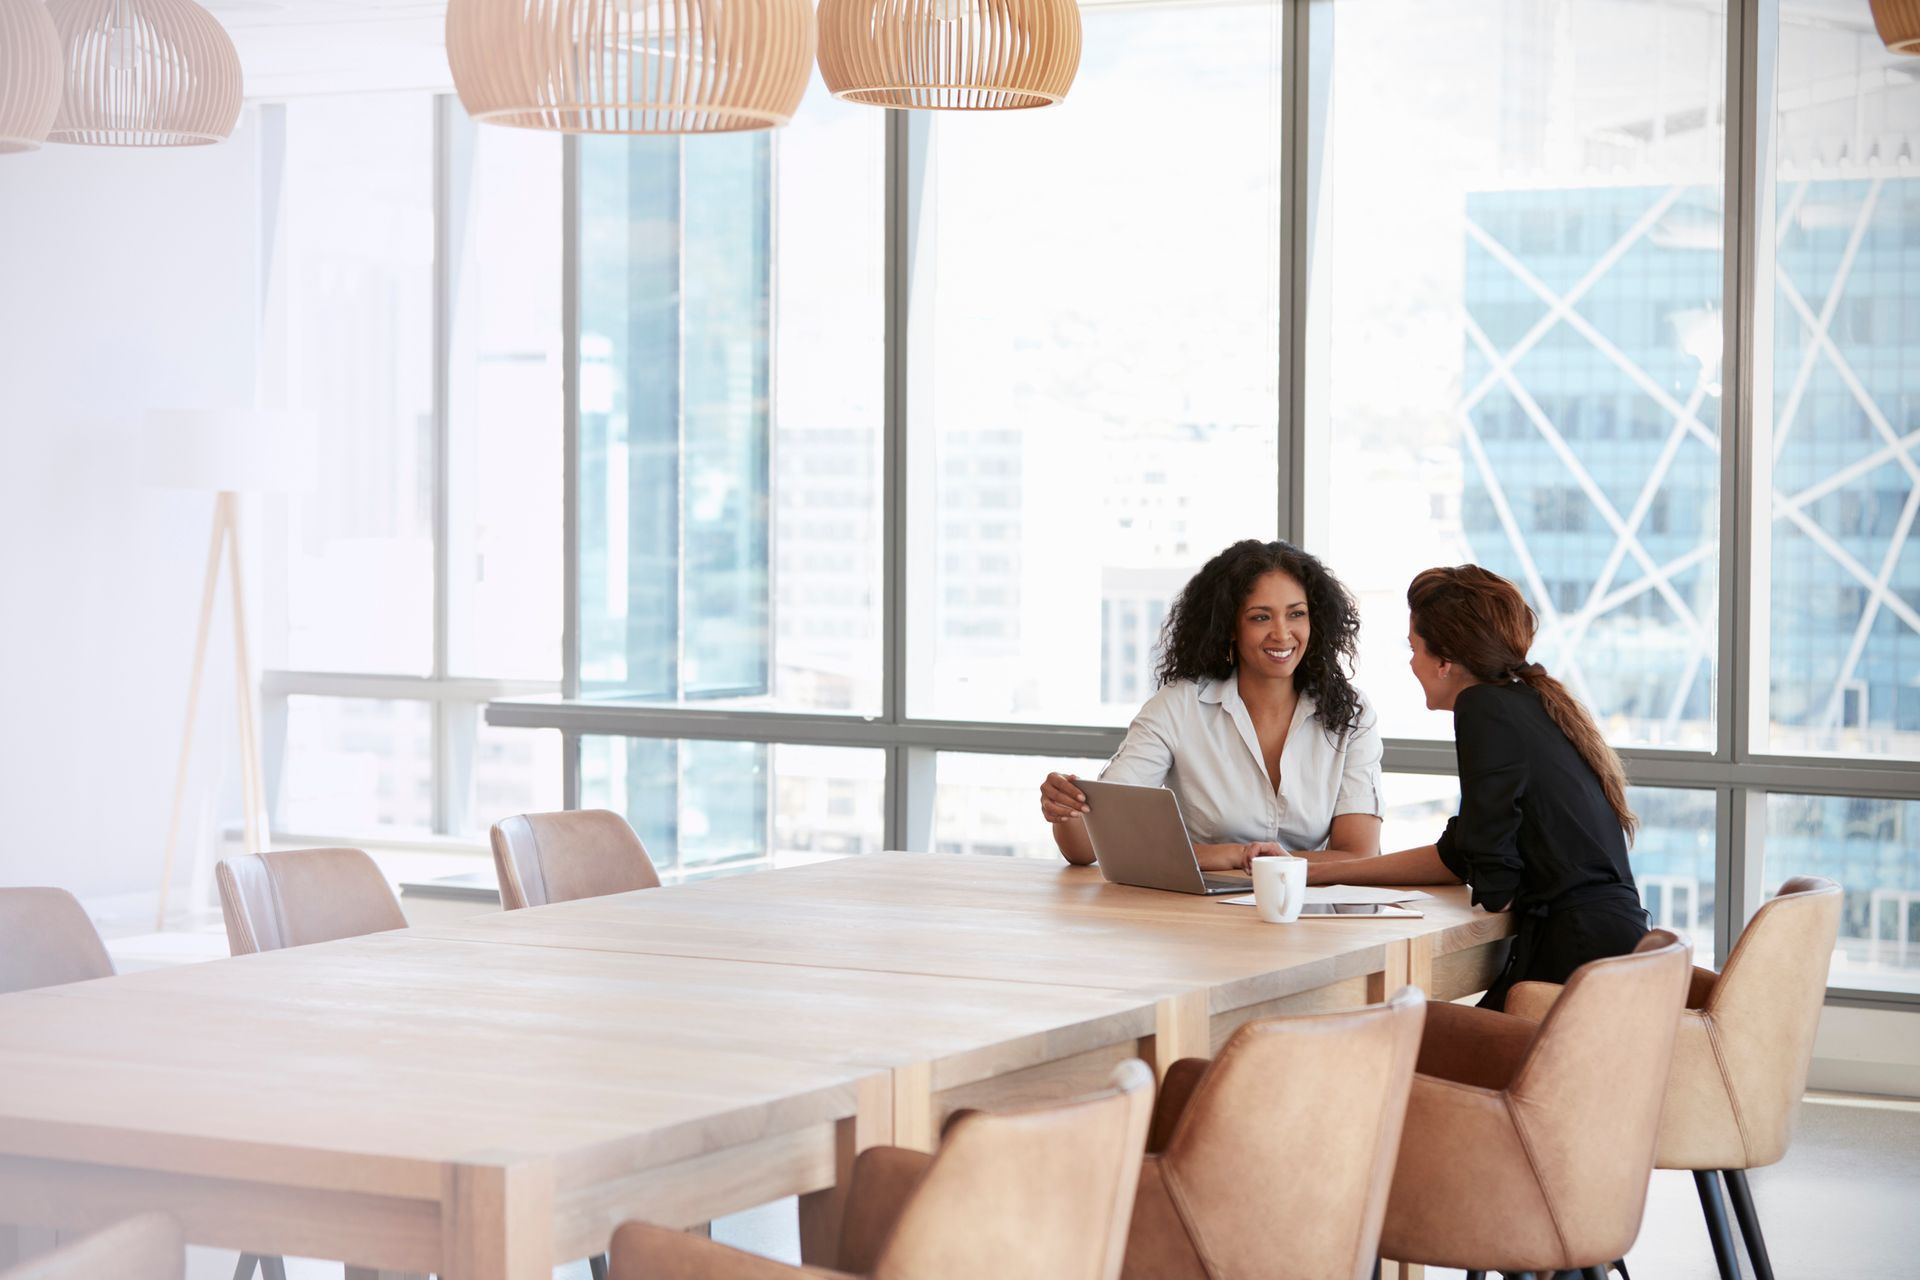 Two women are sitting at a long table in a conference room talking to each other.